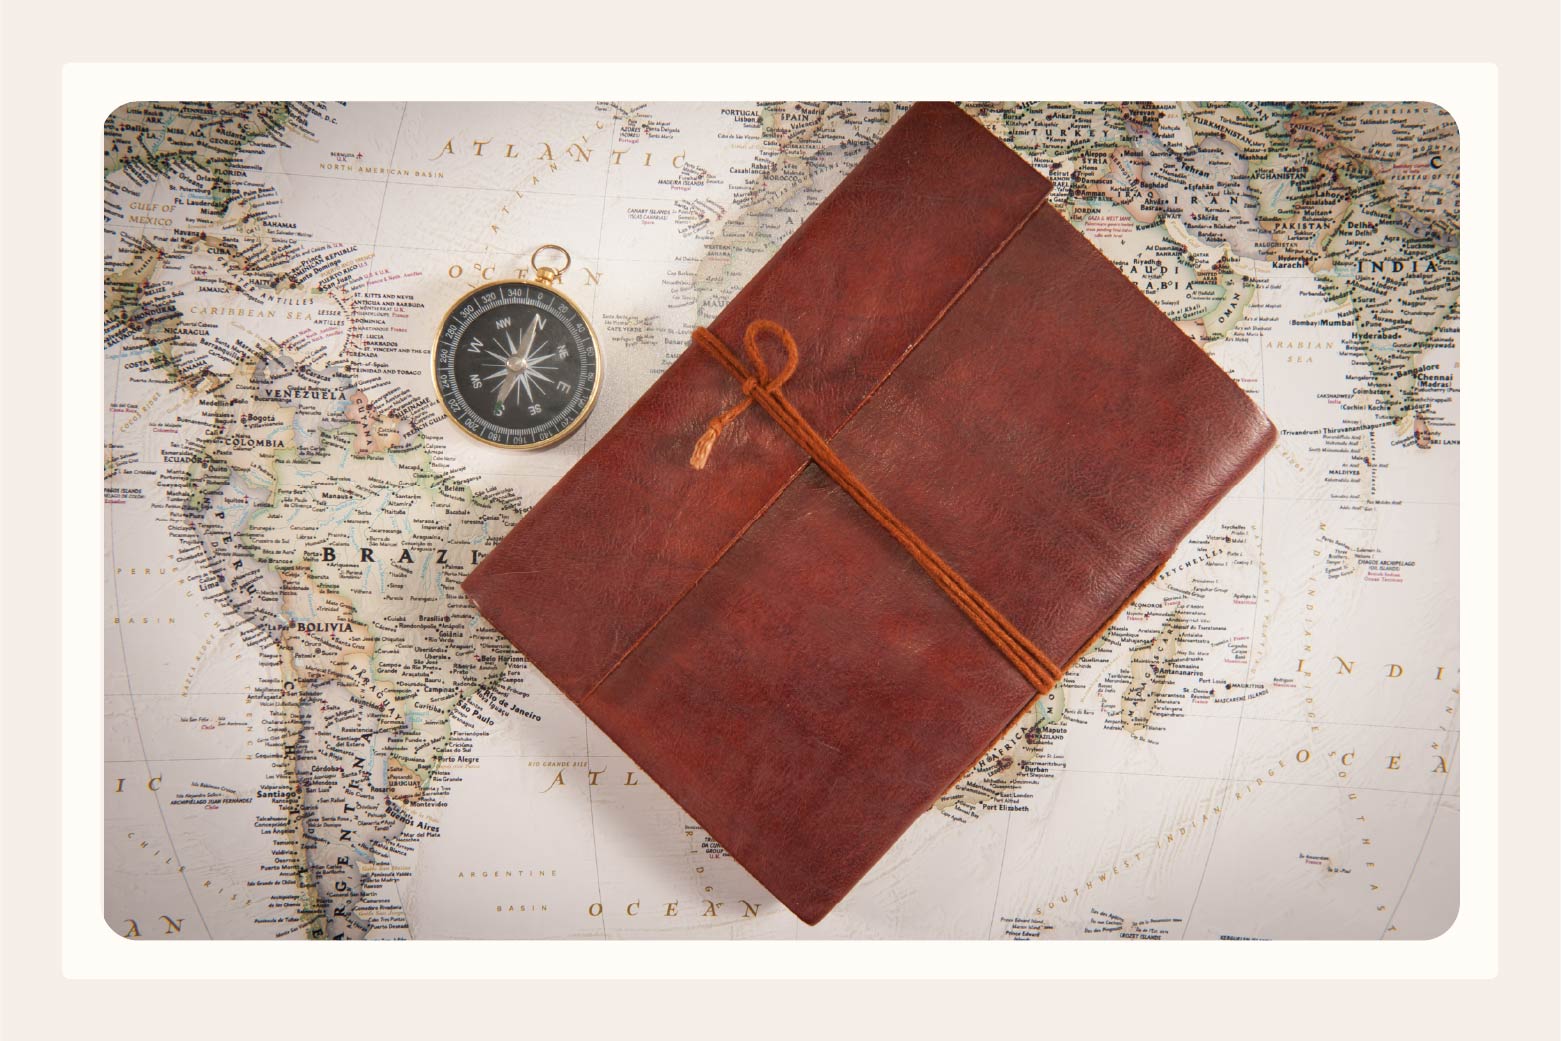 leather-bound journal and compass laying on a world map